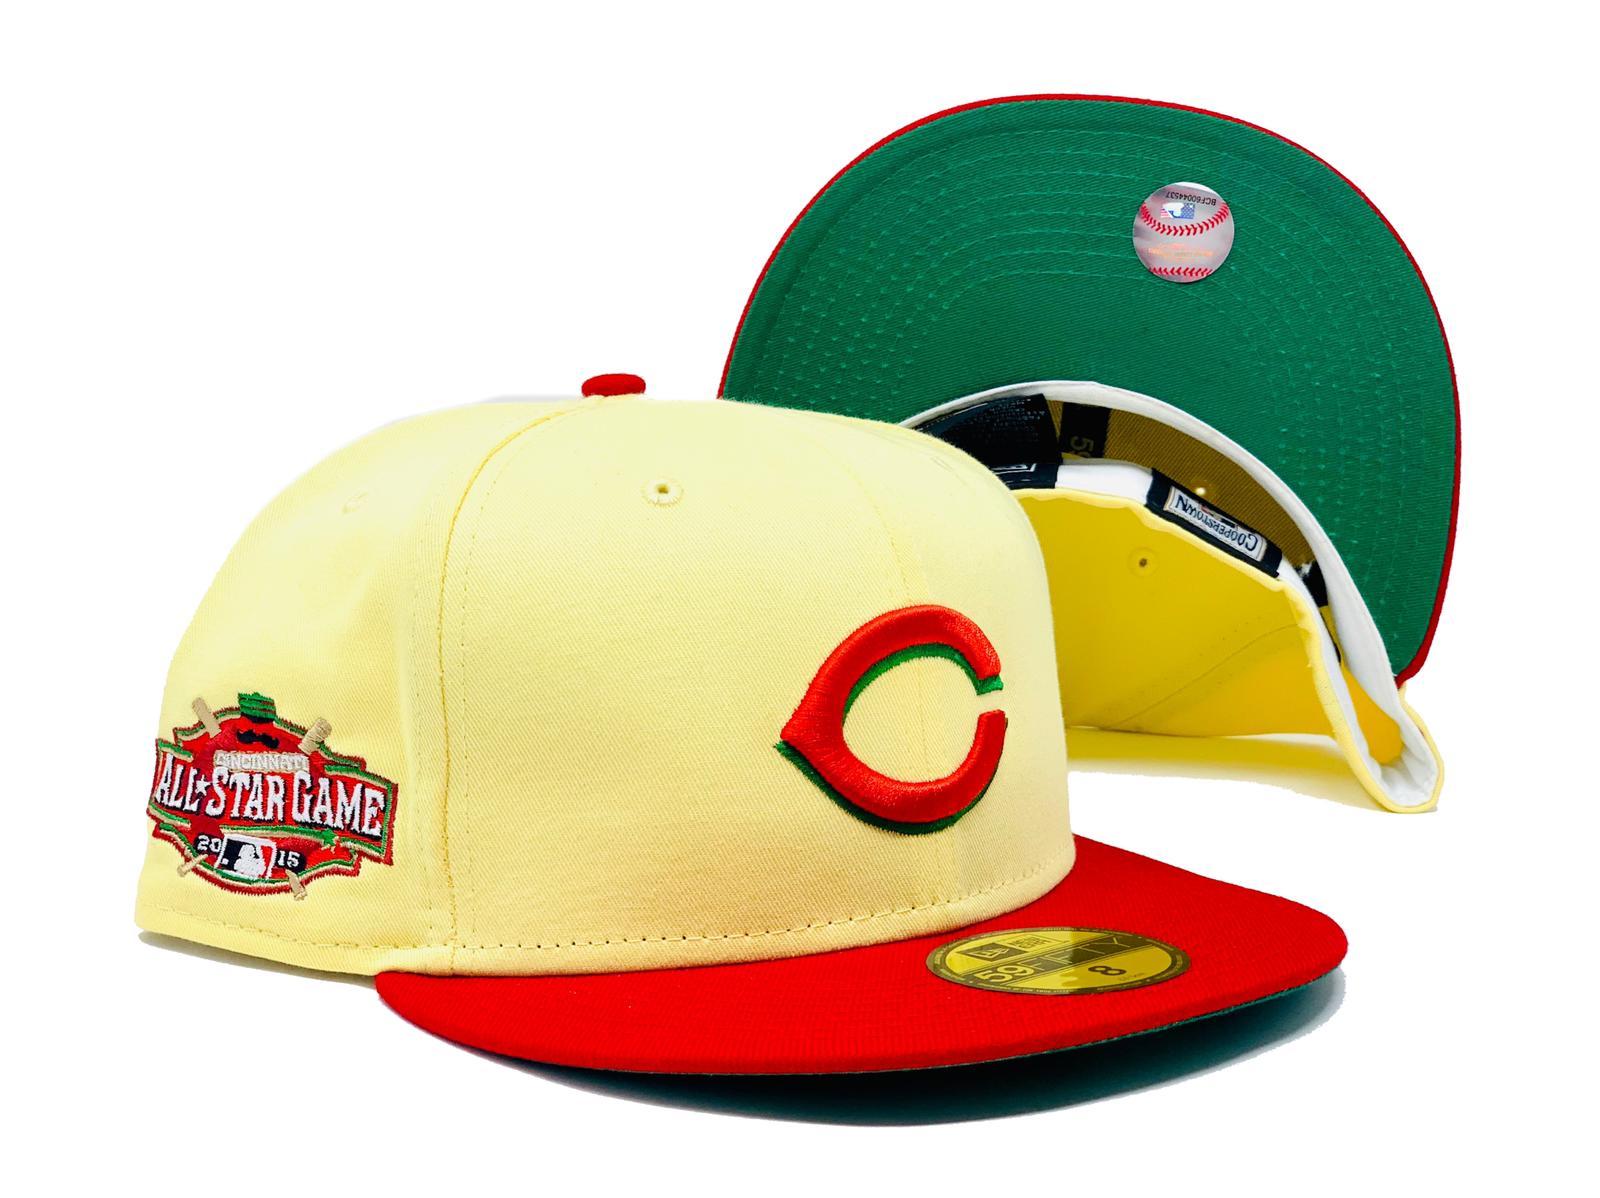 Pics: Reds 2015 All-Star Game Jersey, Cap Patches – SportsLogos.Net News